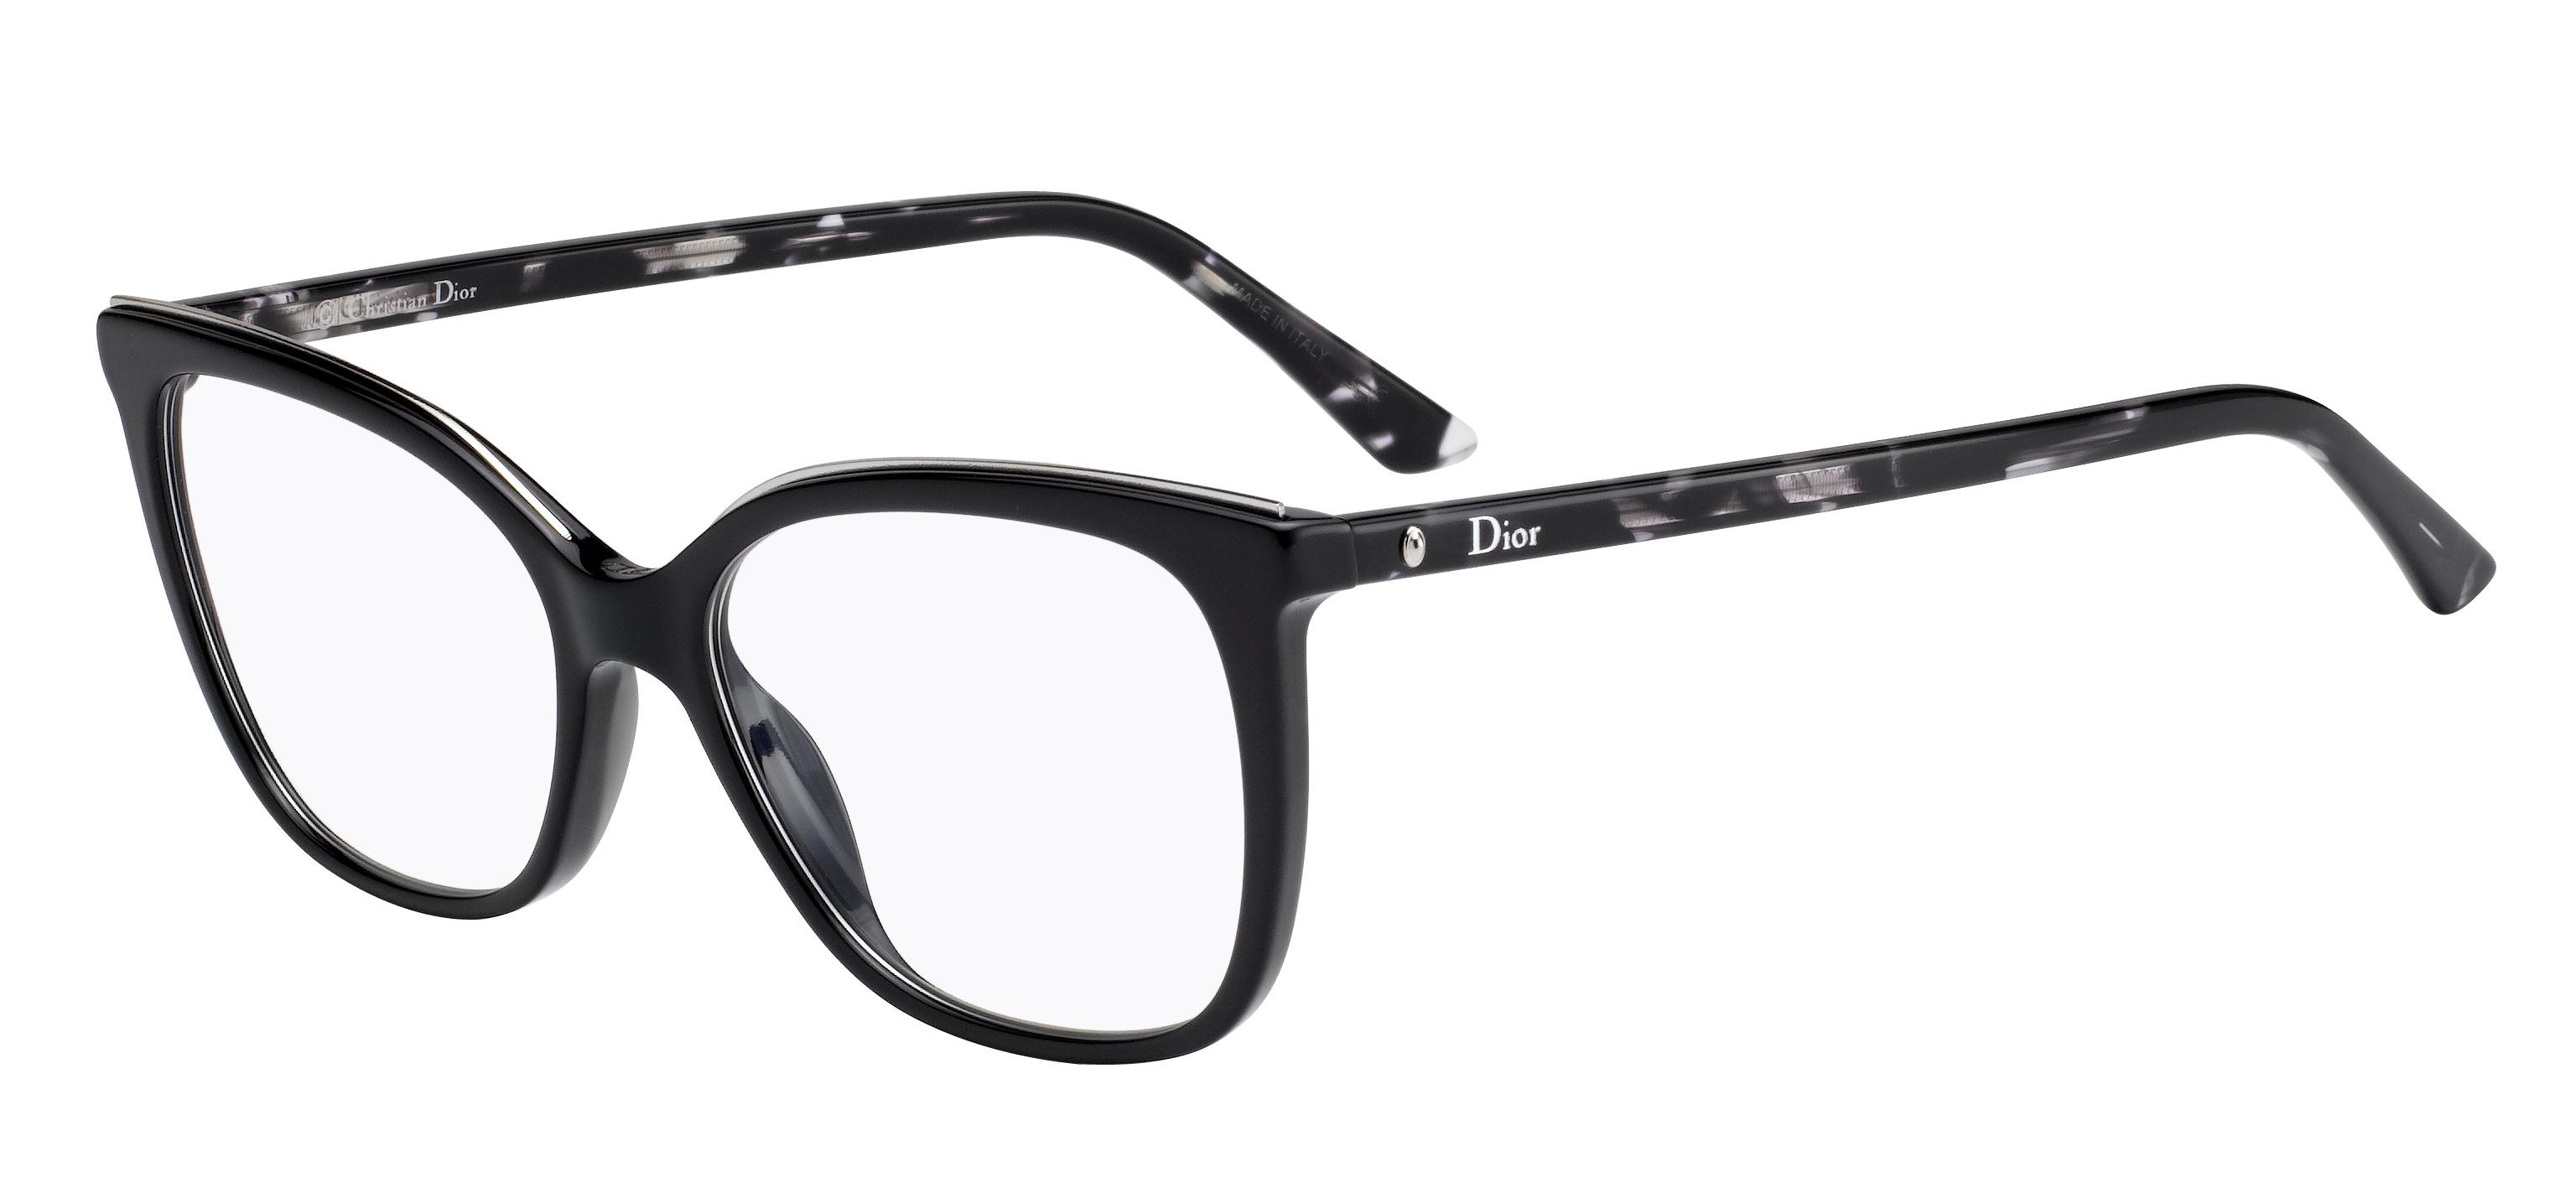 Dior style glasses available from Arlo Wolf